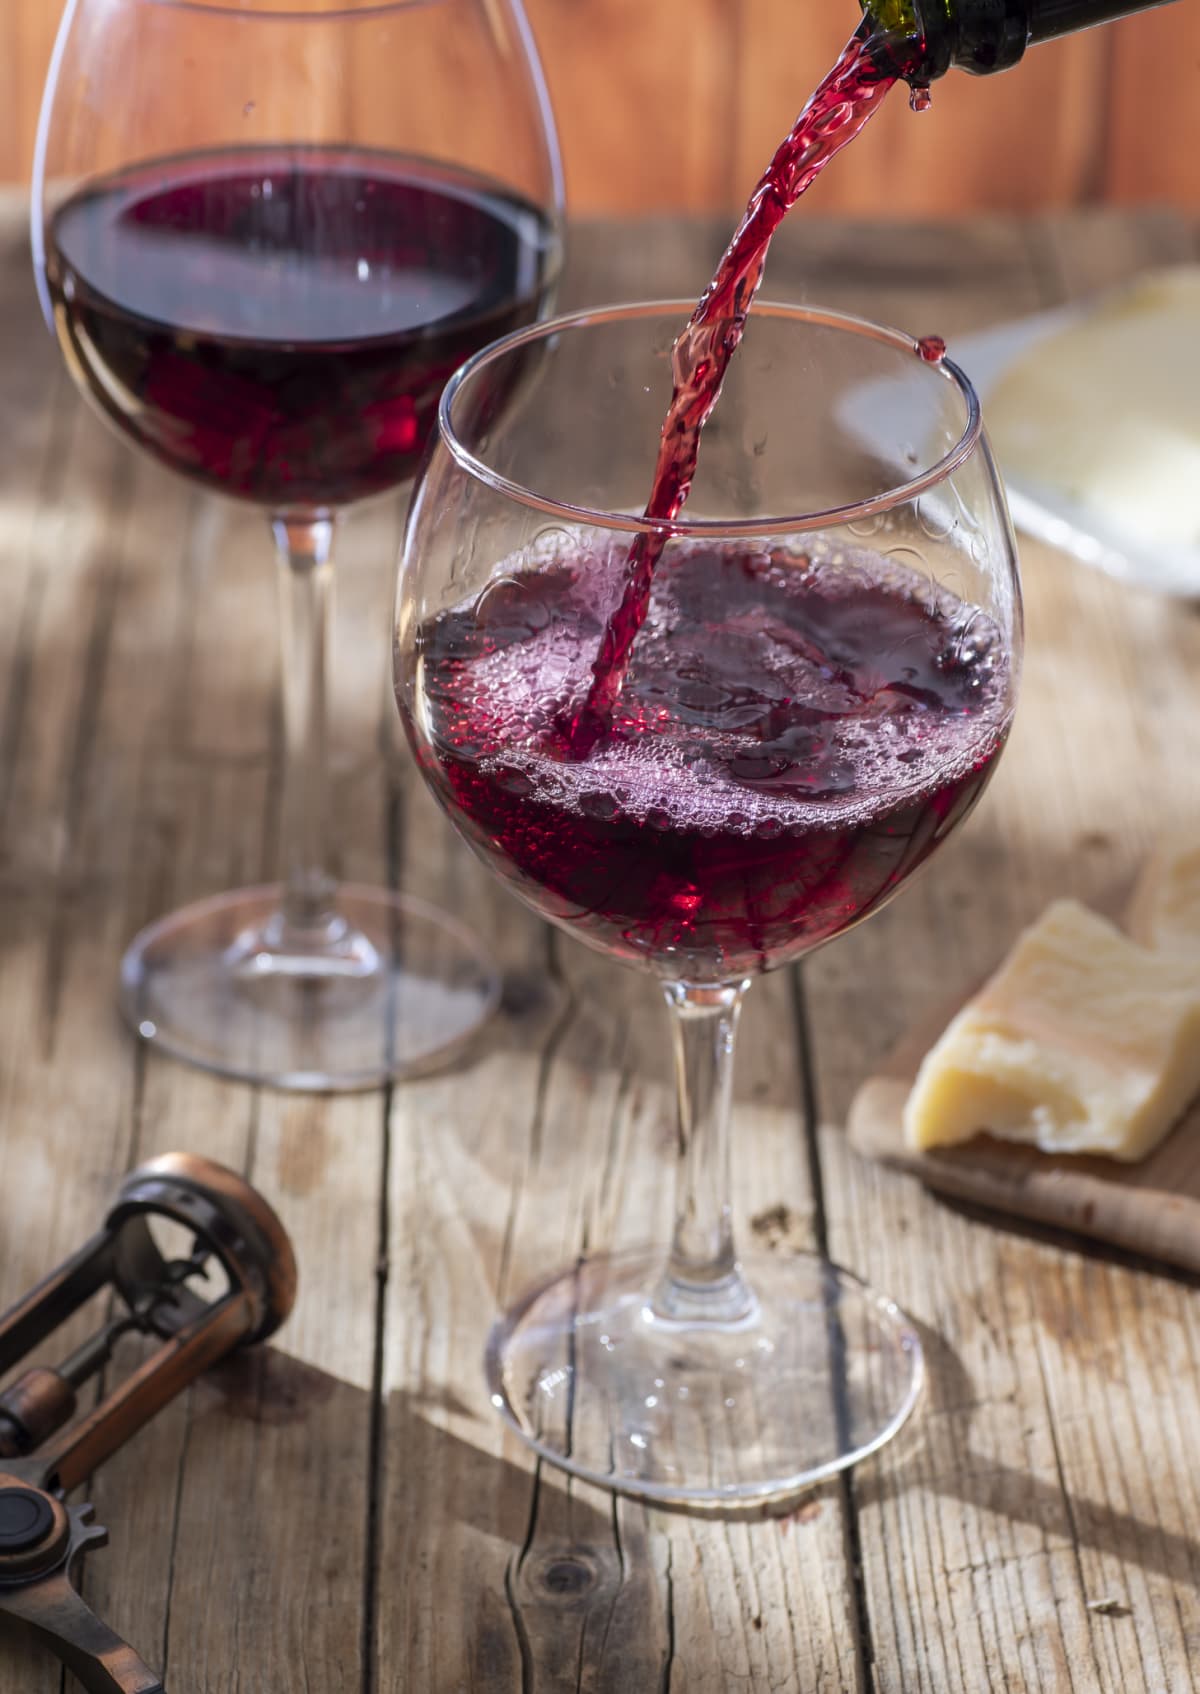 Lambrusco wine is poured into a goblet glass, in the lower part the bubbles that are created on the surface